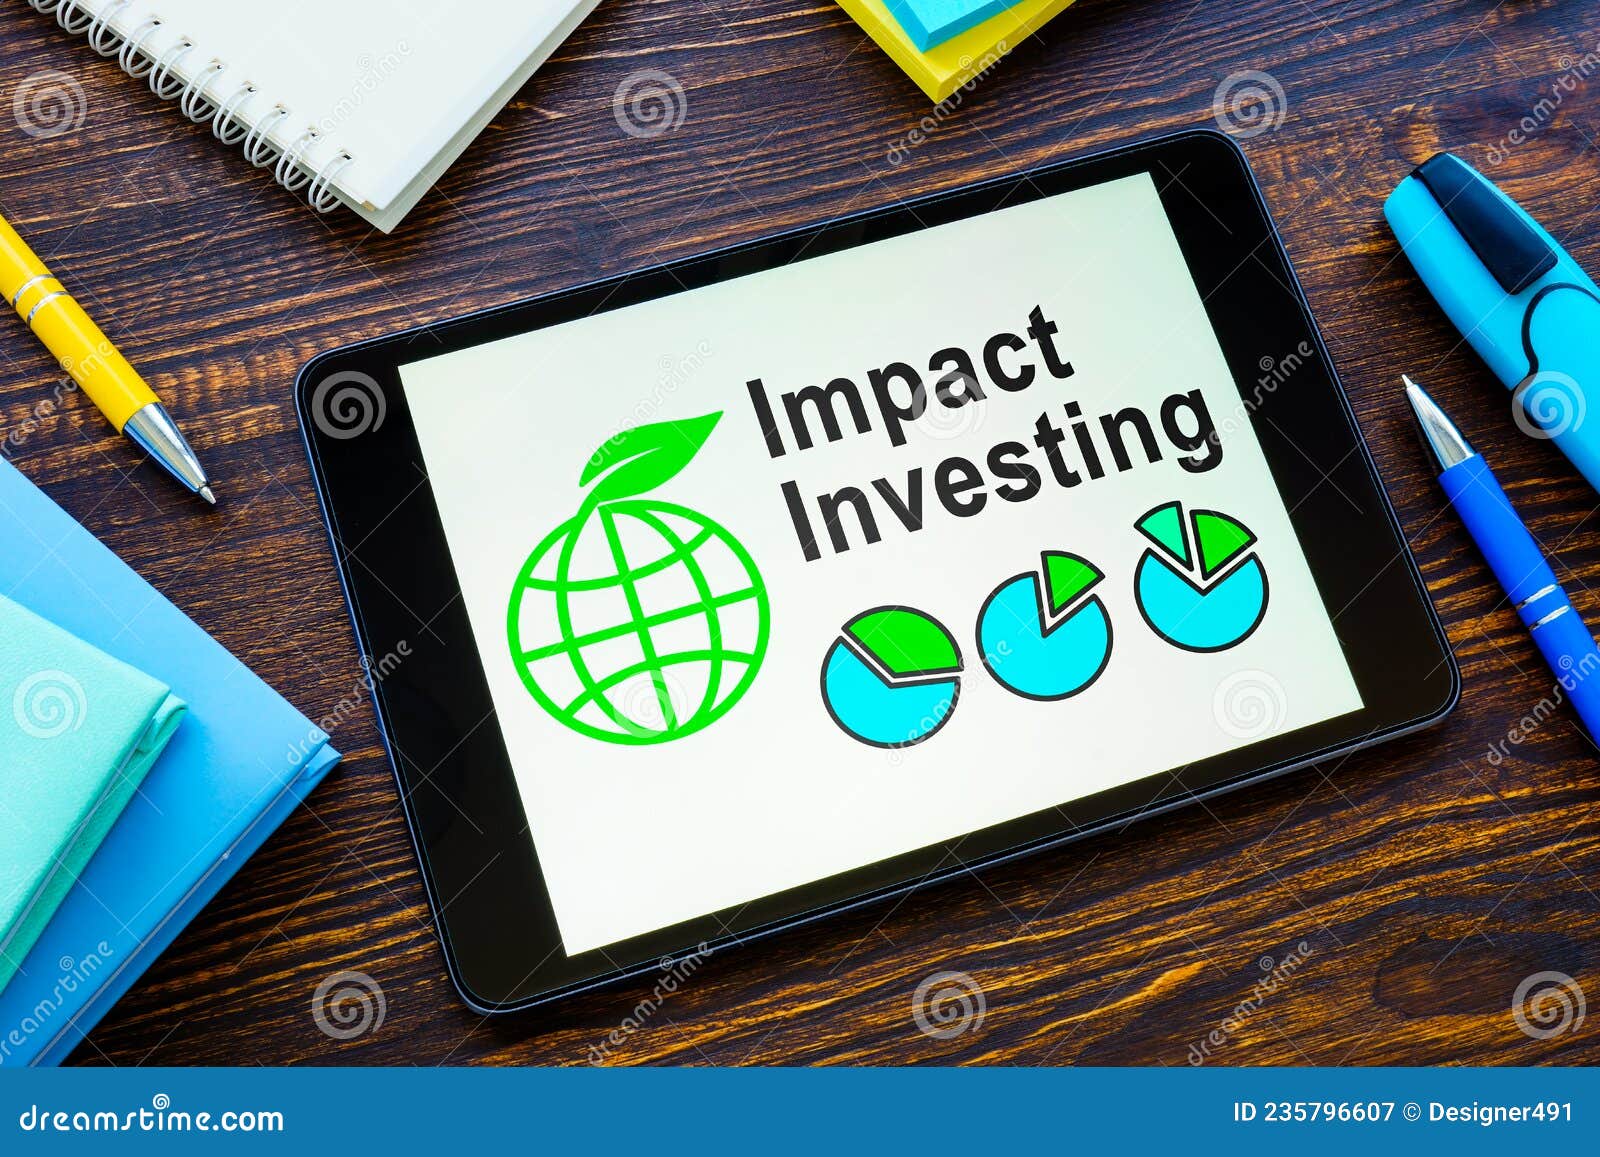 tablet with impact investing info and notebooks.